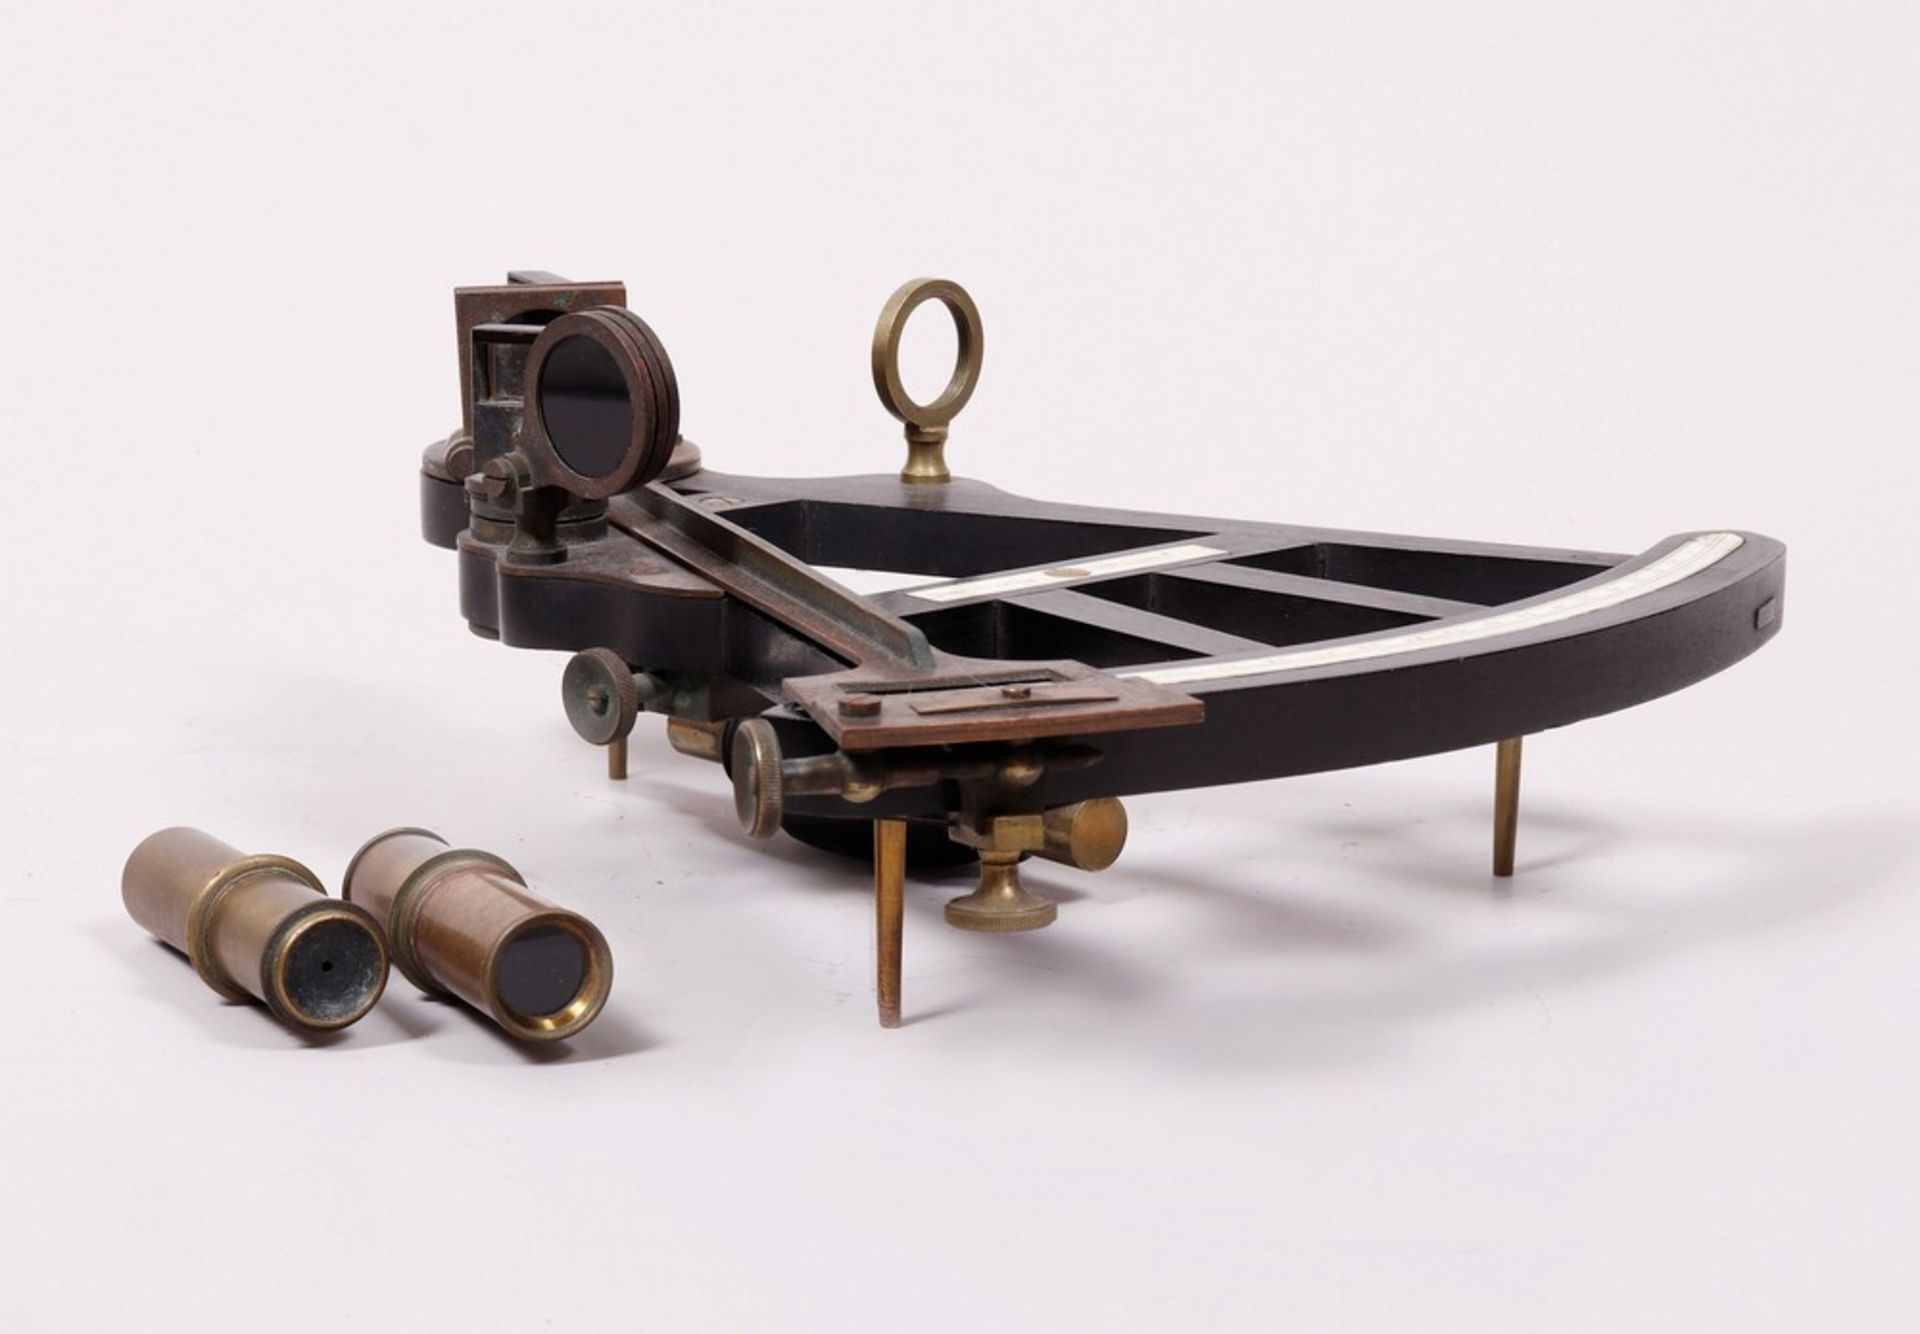 Octant in transport box, Spencer Browning & Co., London, early 19th C.